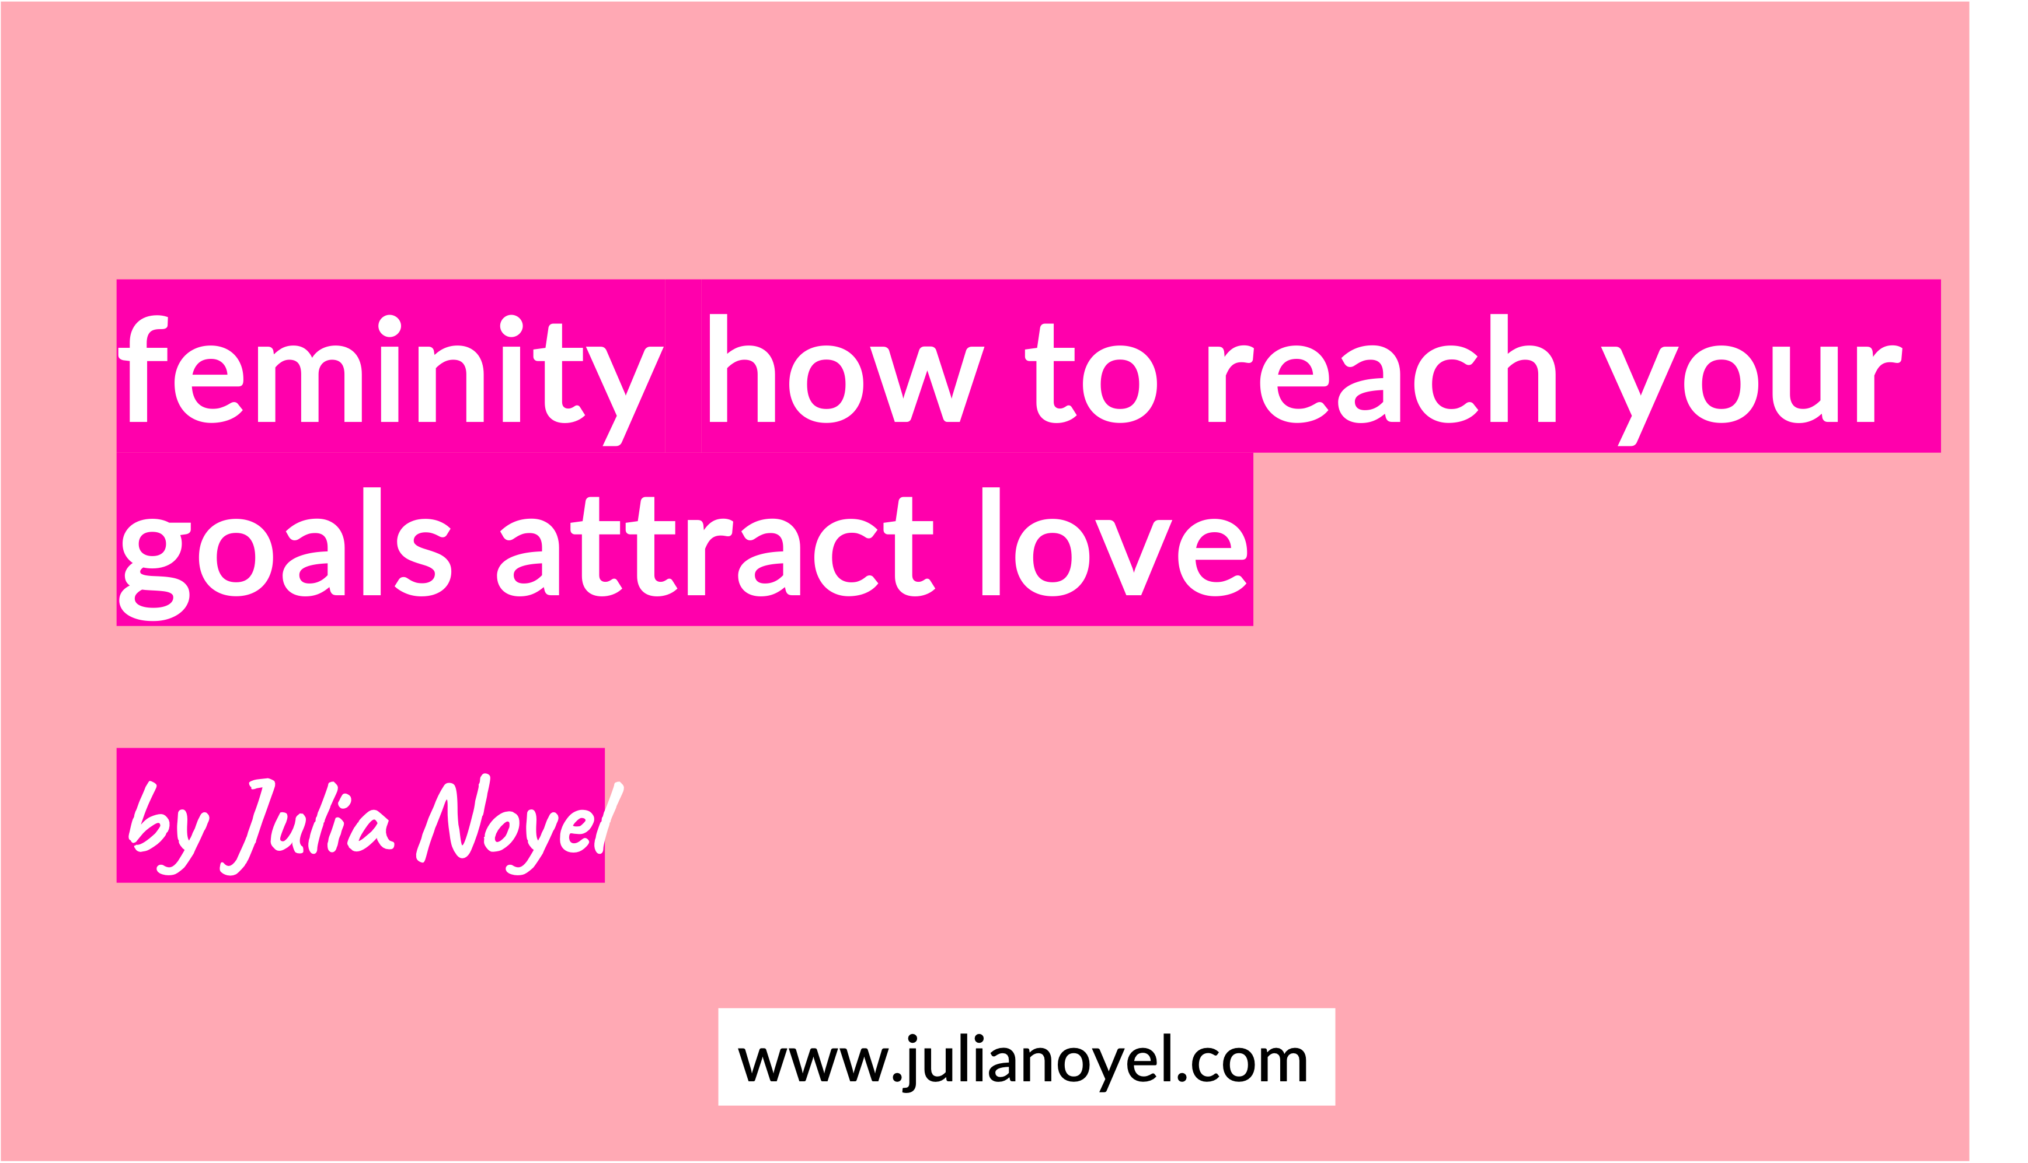 feminity how to reach your goals attract love by julia noyel